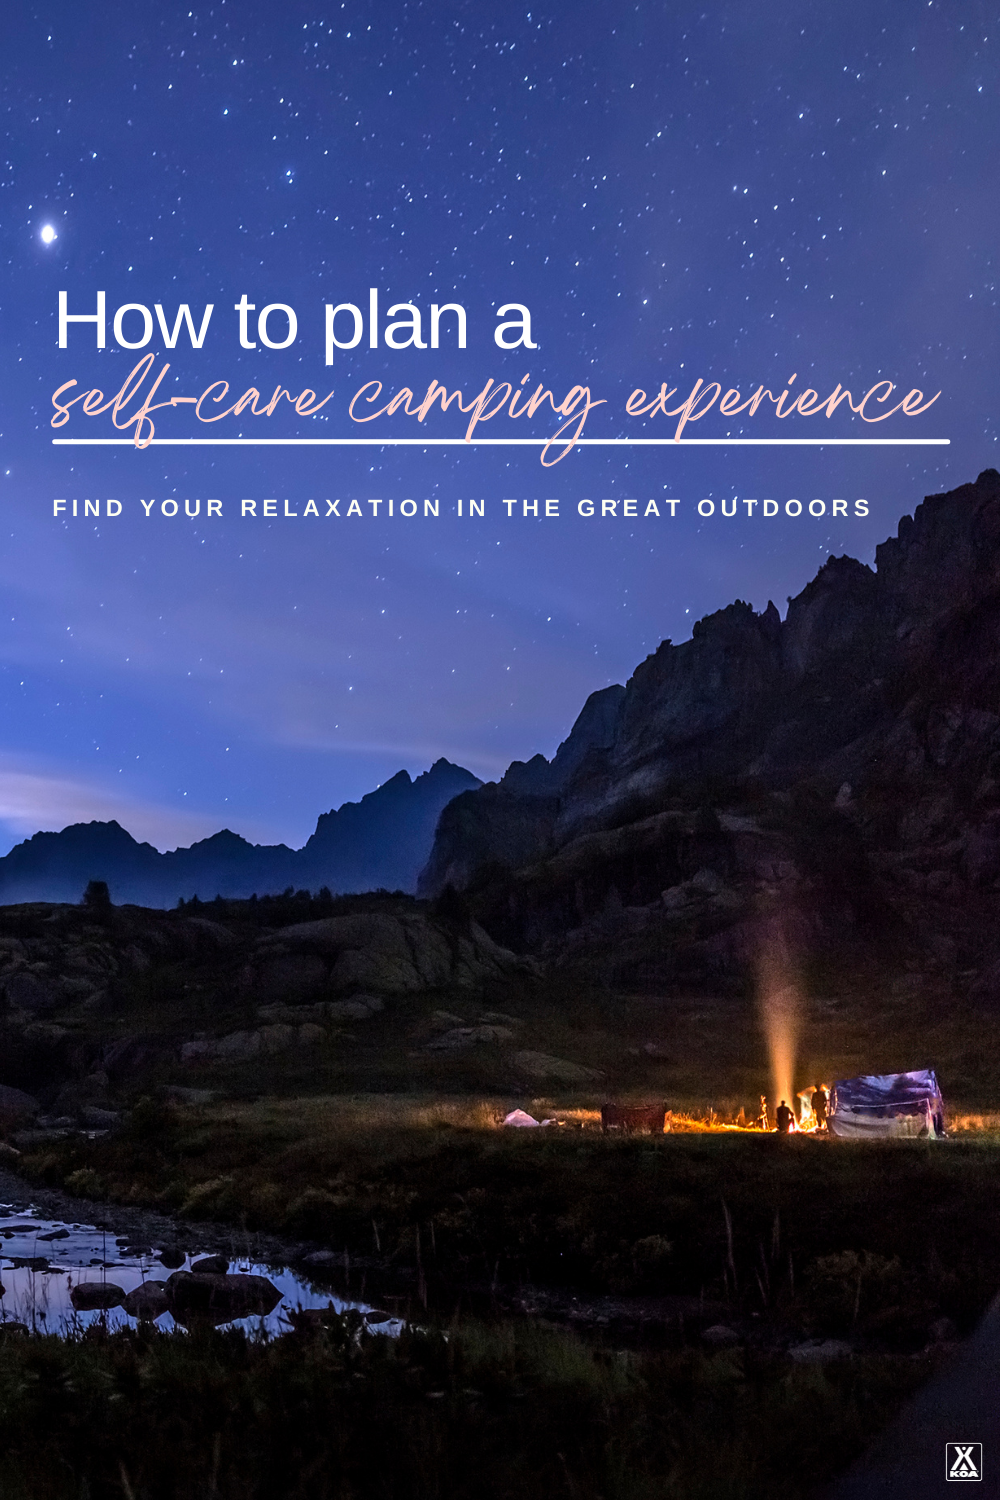 Need some self-care? Consider a camping trip to connect with nature! Read on to learn more about the health benefits of camping and self-care outdoors.